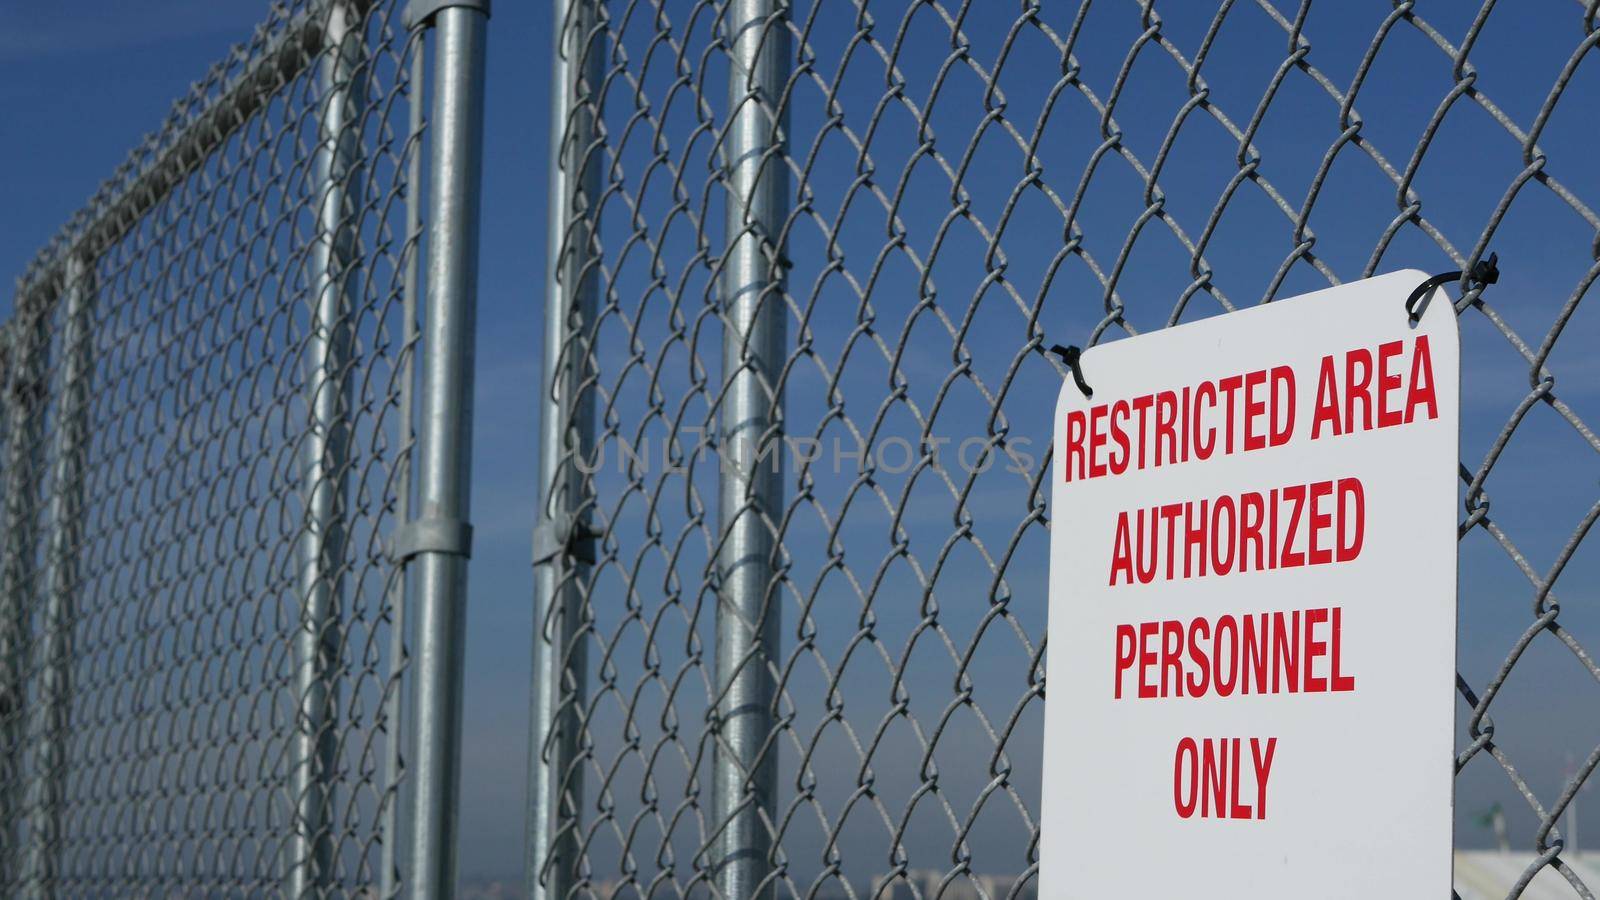 Restricted area, authorized personnel only sign in USA. Red letters, keep off warning on metal fence, United States border symbol. No trespassing notice means violators will be prosecuted by US law by DogoraSun